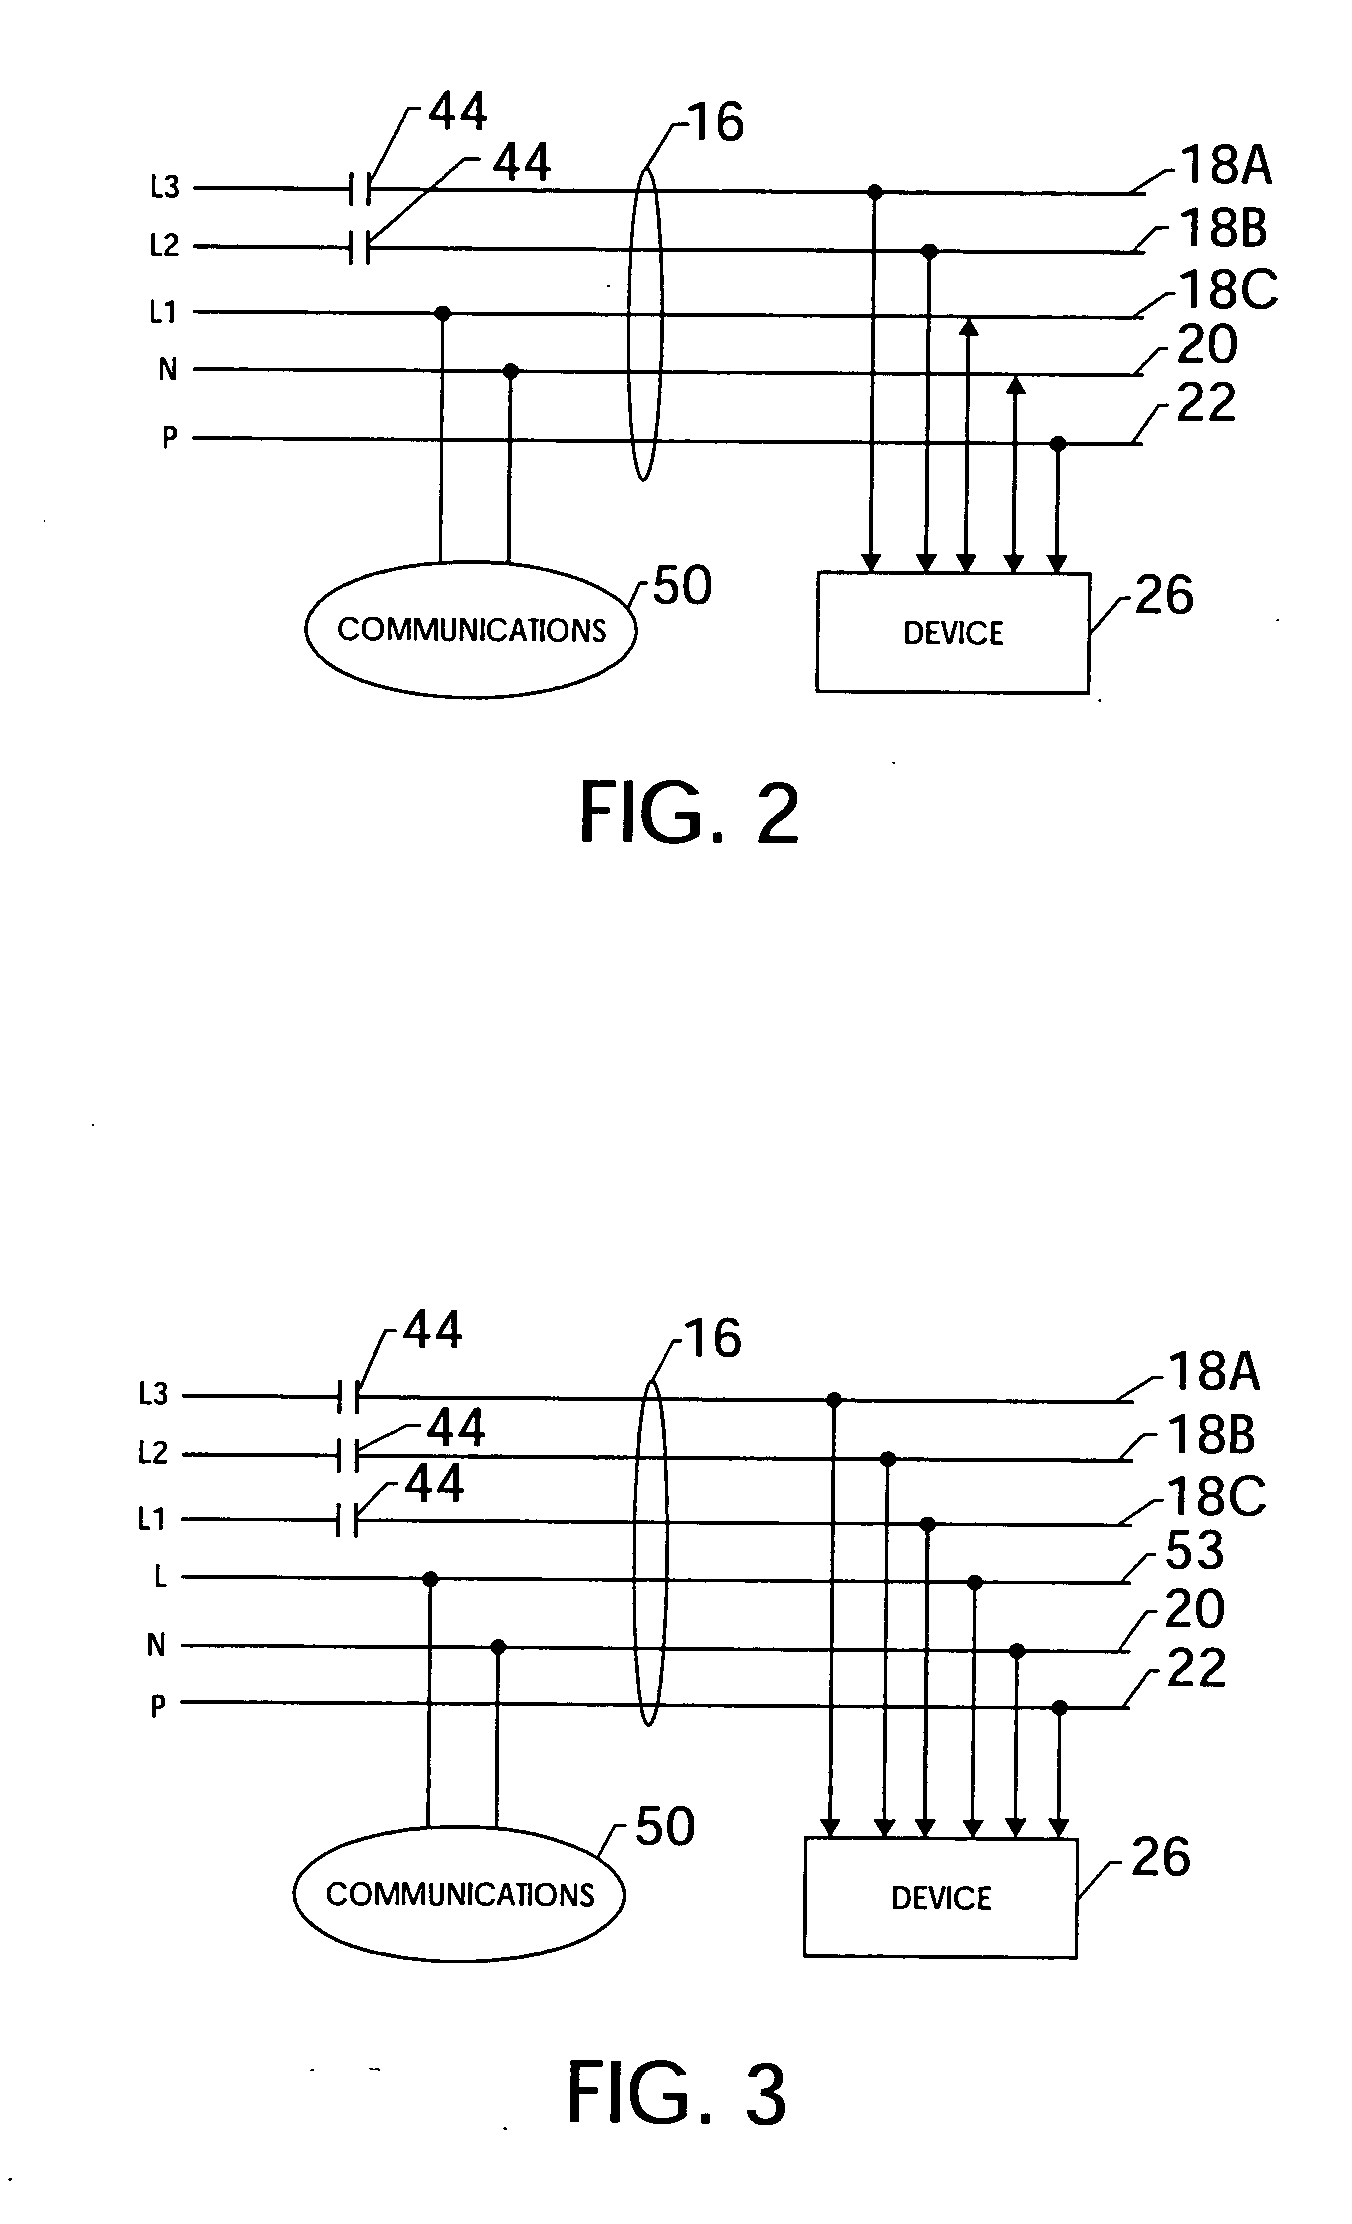 Multi-function integrated automation cable system and method